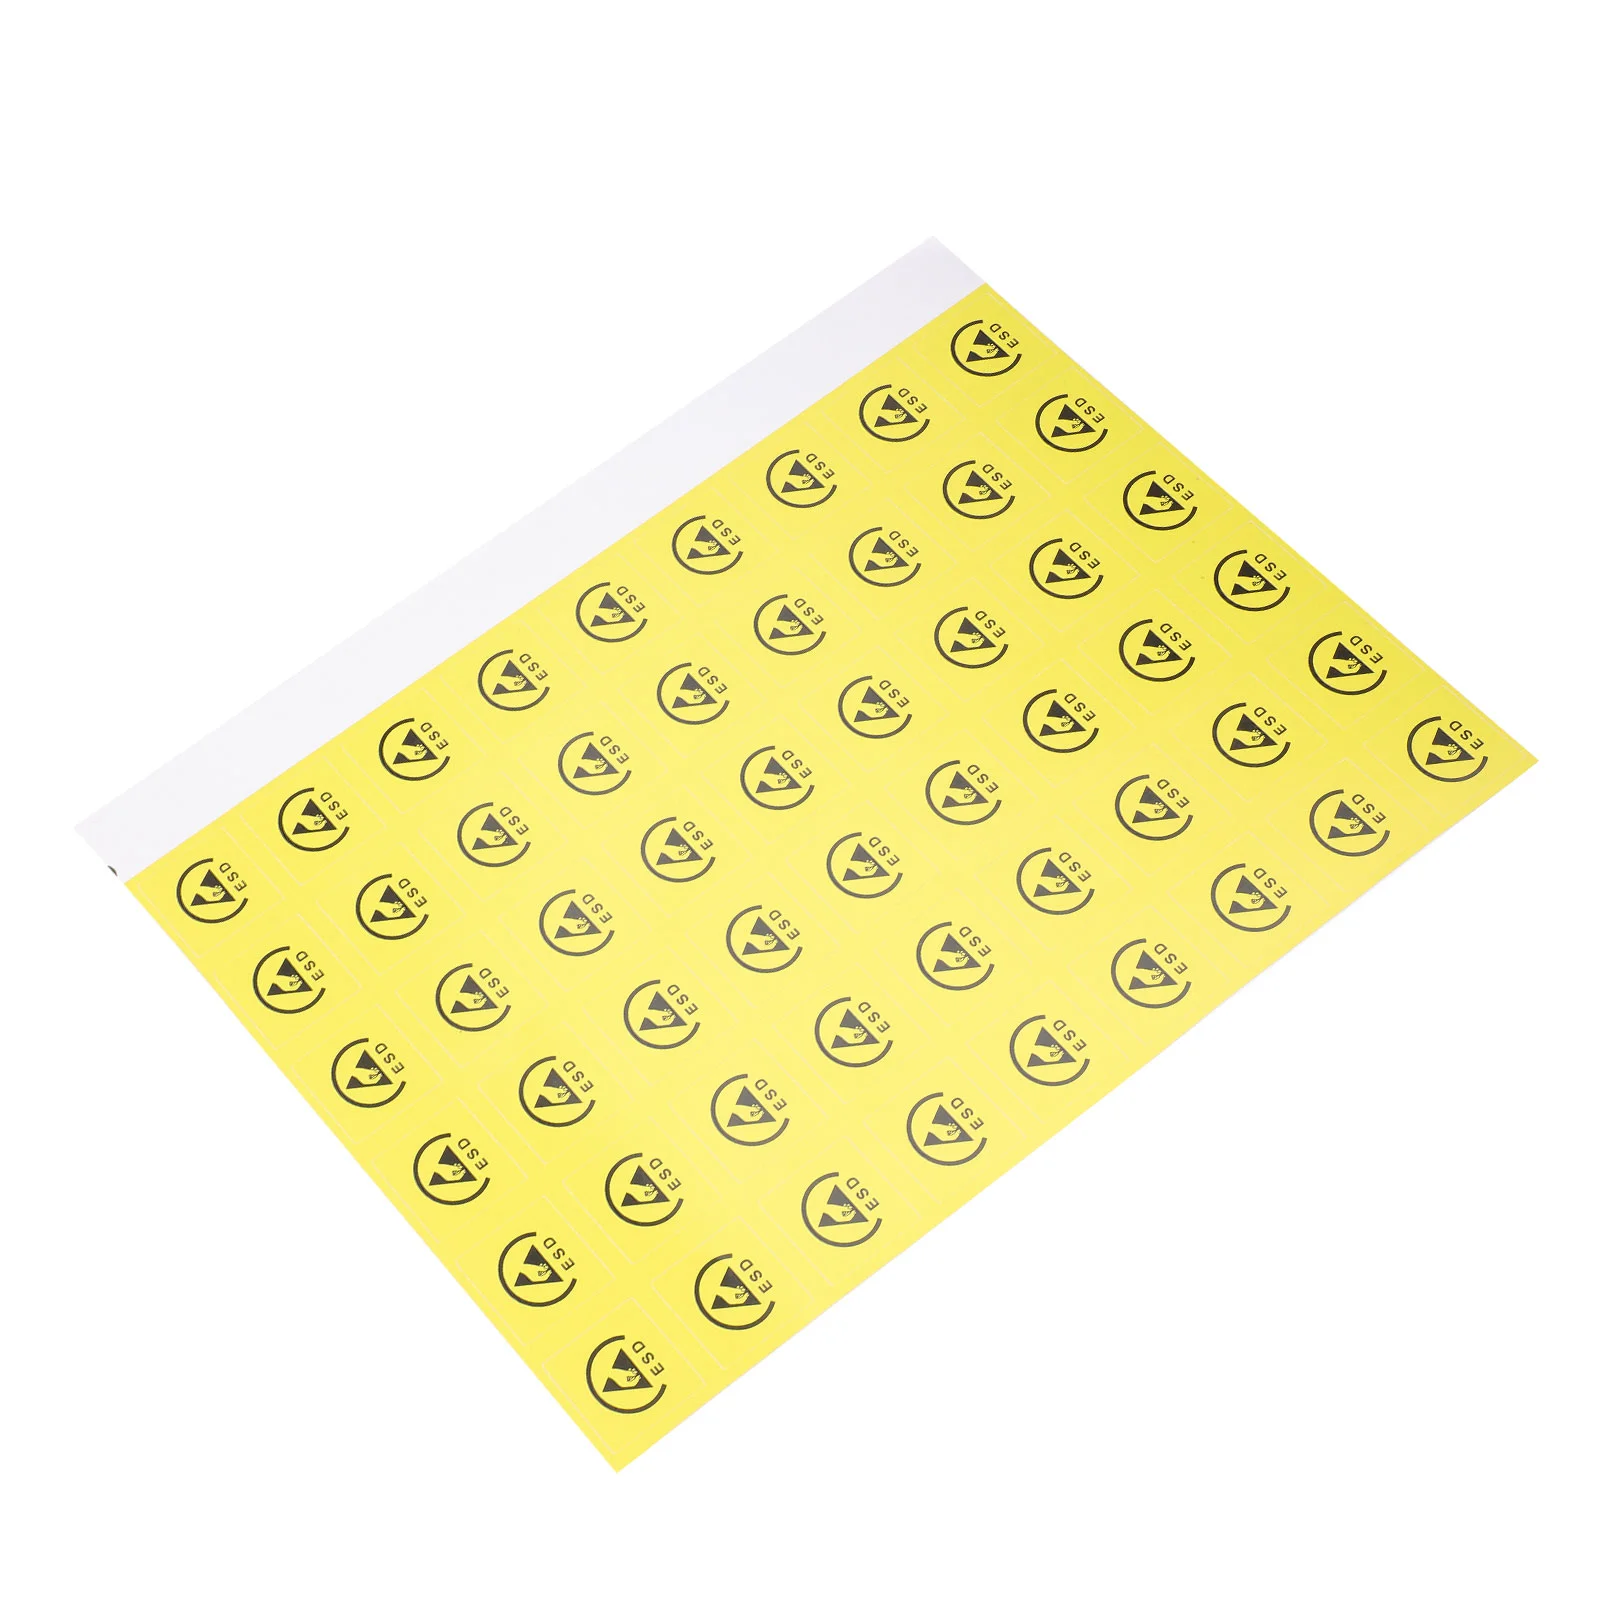 

200 Pcs Static Stickers Labels Safety Caution Warning Decals Paper Electrostatic Self Adhesive